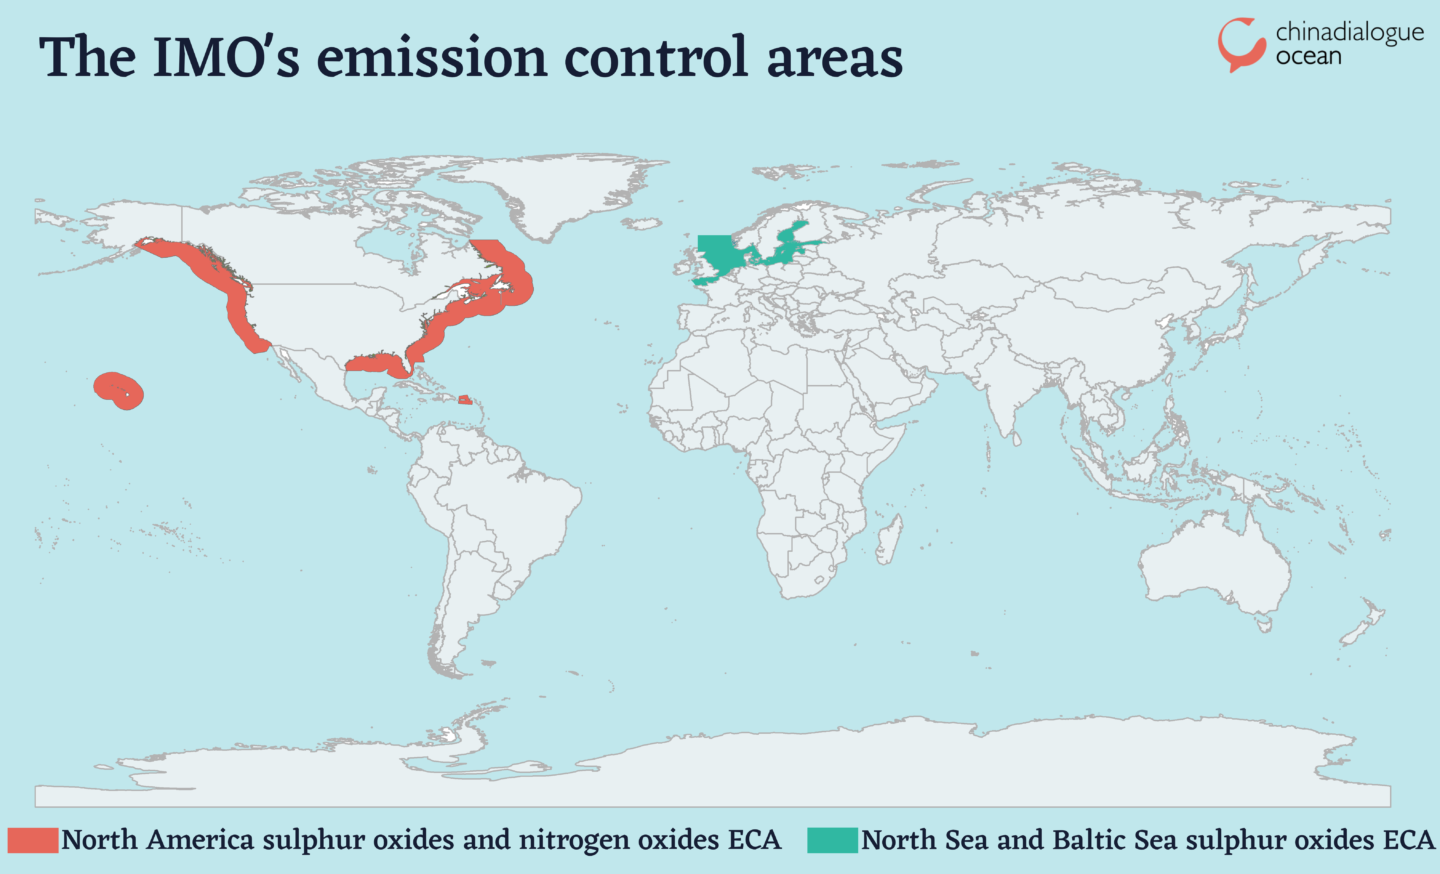 The IMO's emission control areas, shipping emissions, ship emissions, emissions from ships